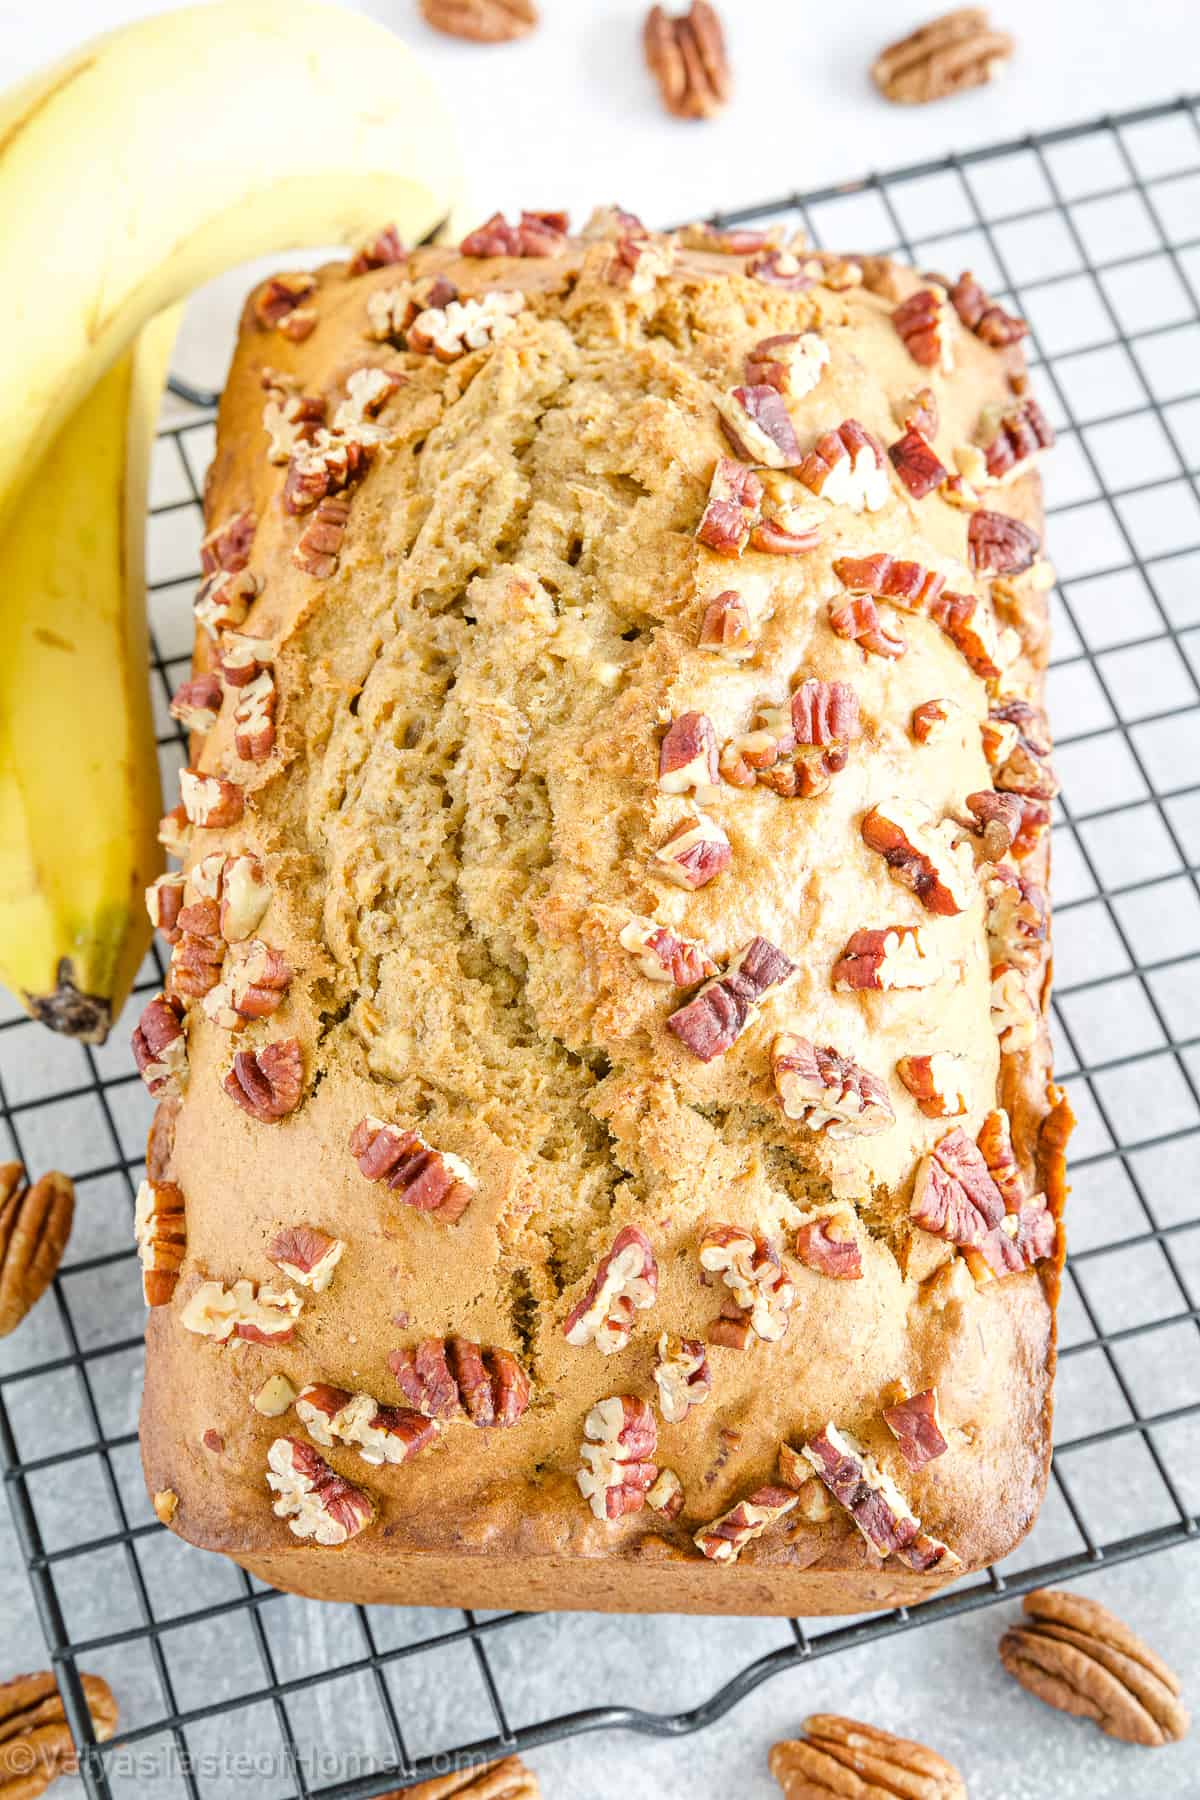 This banana pecan bread recipe is the perfect way to use up overripe bananas and create a tasty snack or dessert that's sure to please.